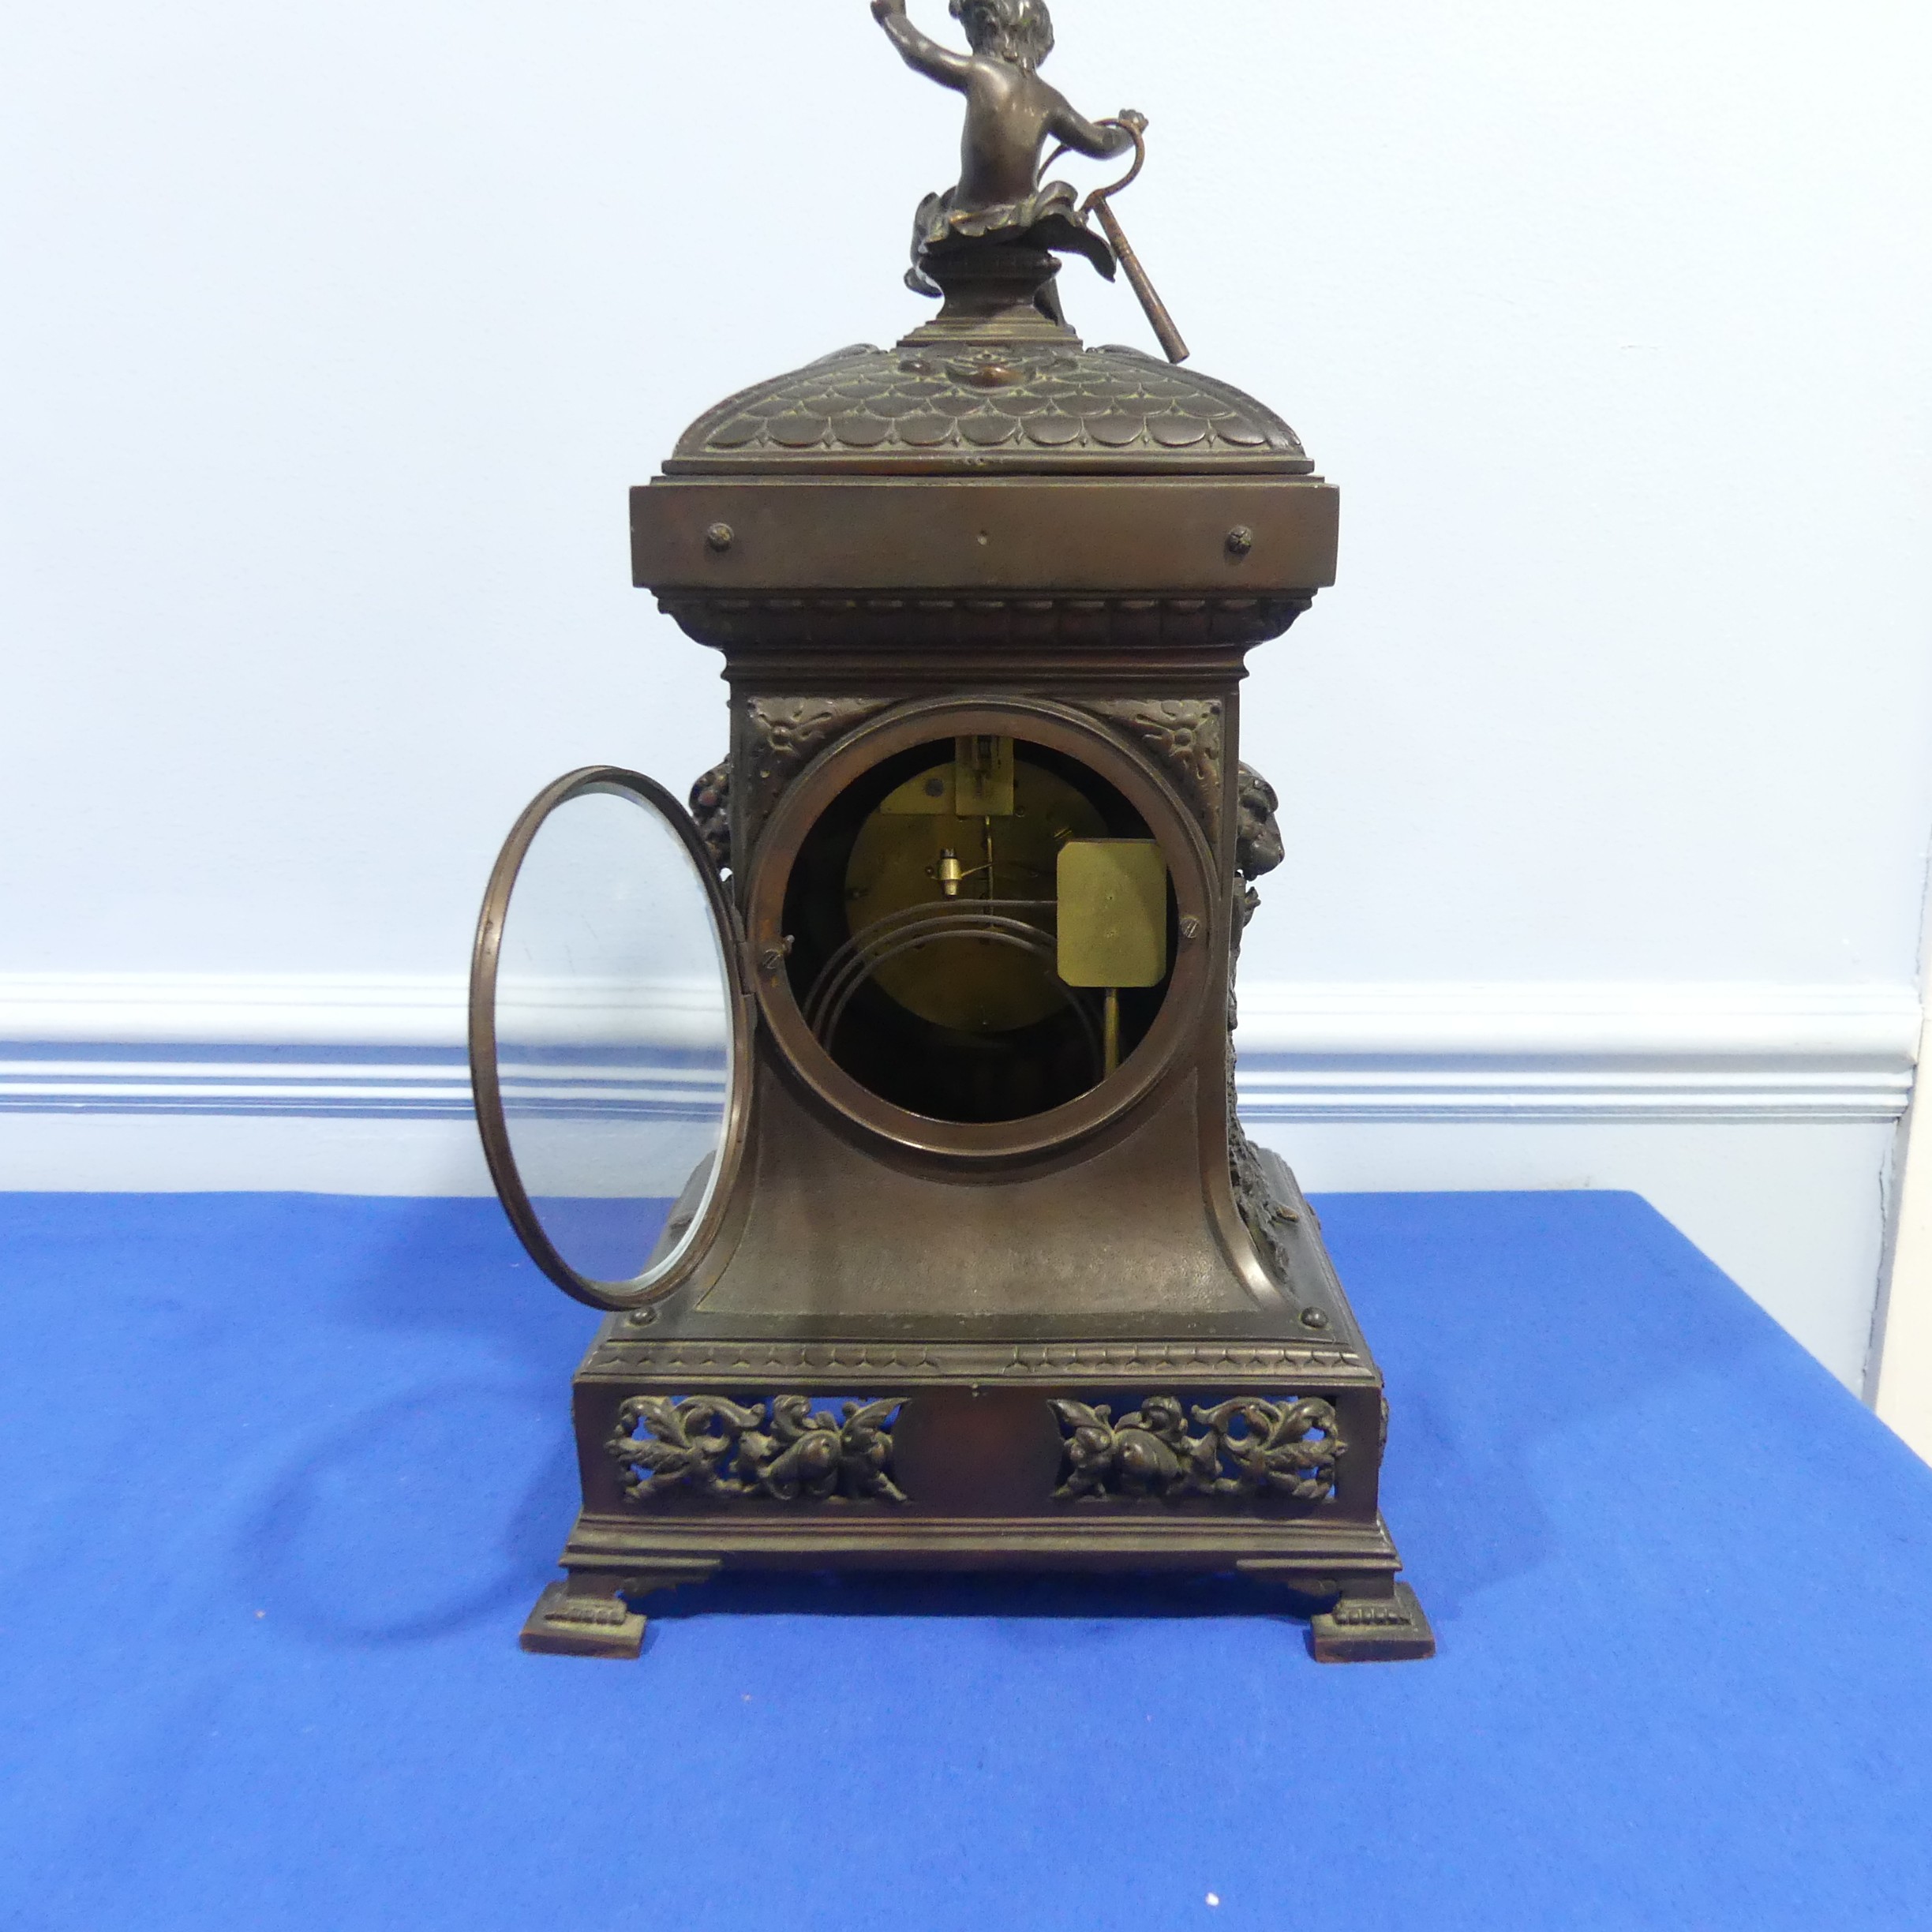 A French bronzed-metal Mantel Clock, late 19th century, the architectural case surmounted with an - Image 9 of 10